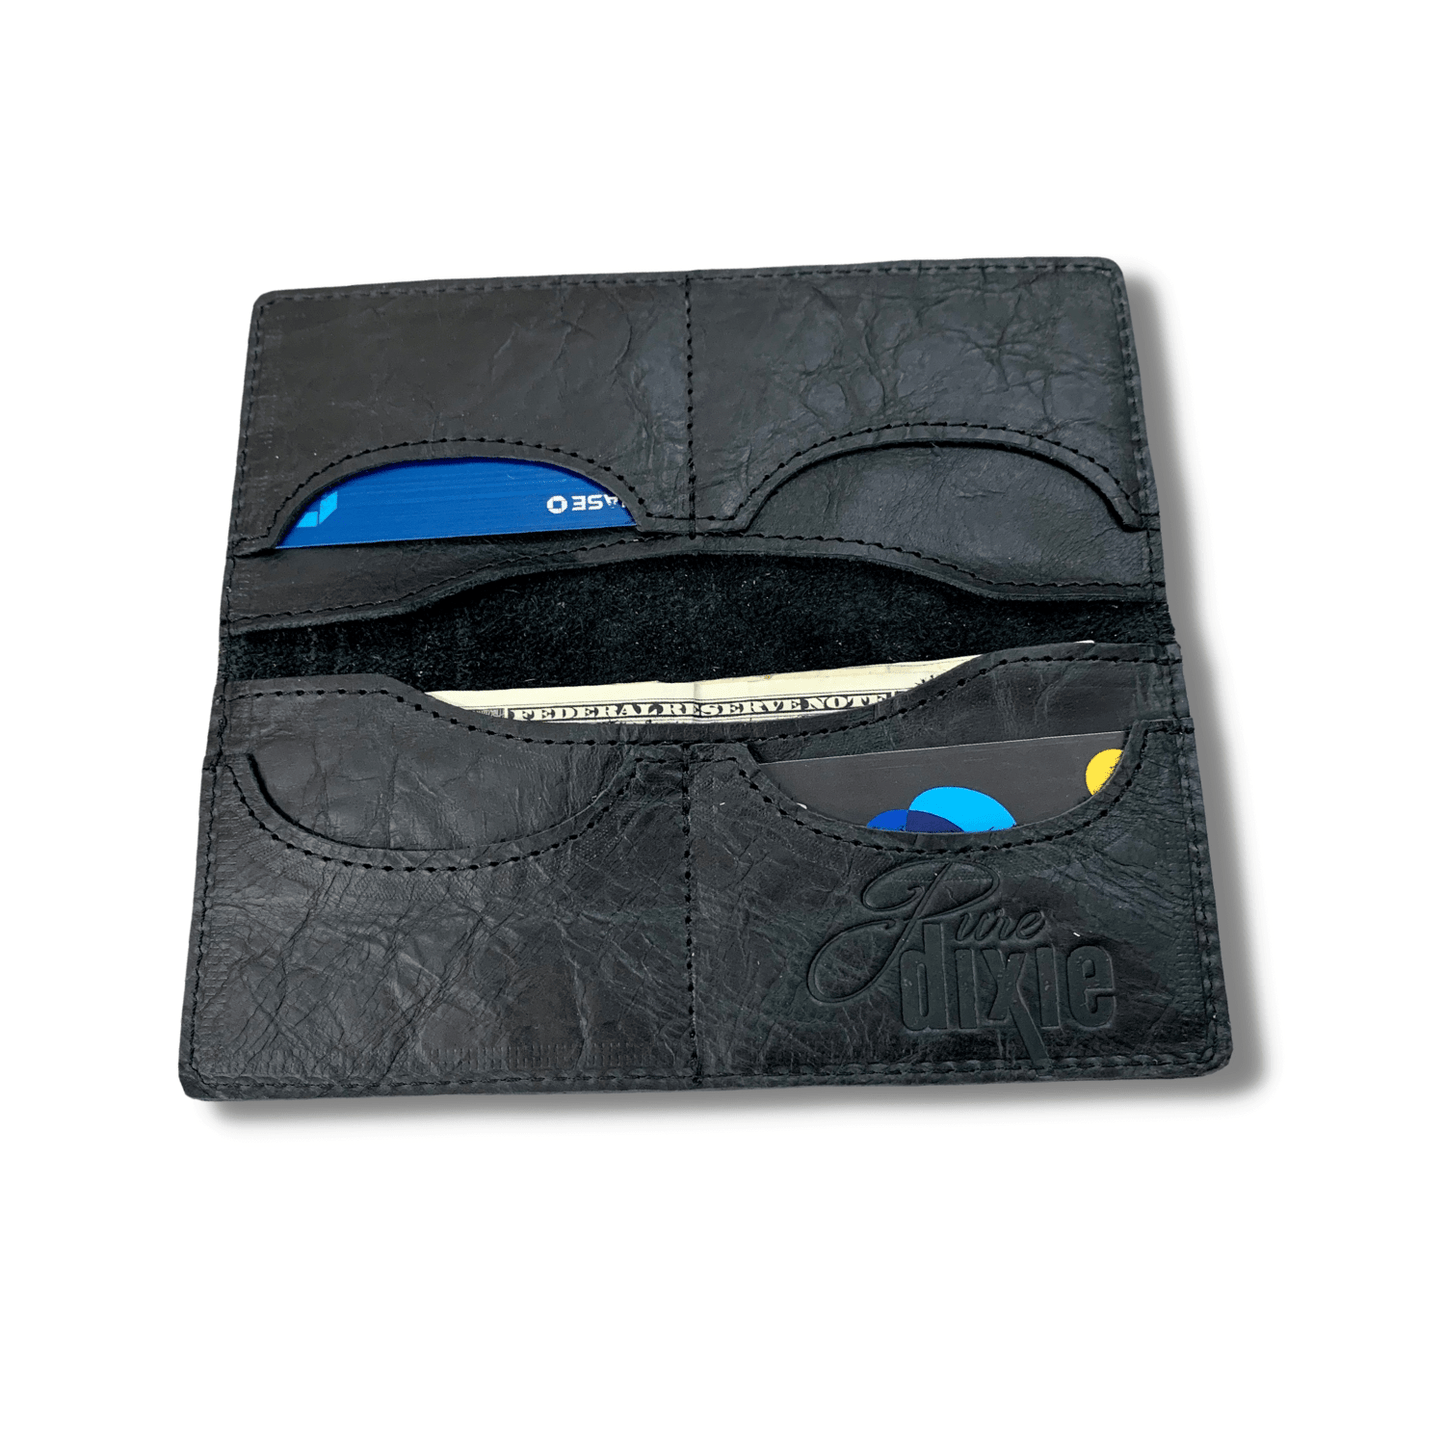 The Bold Wallet